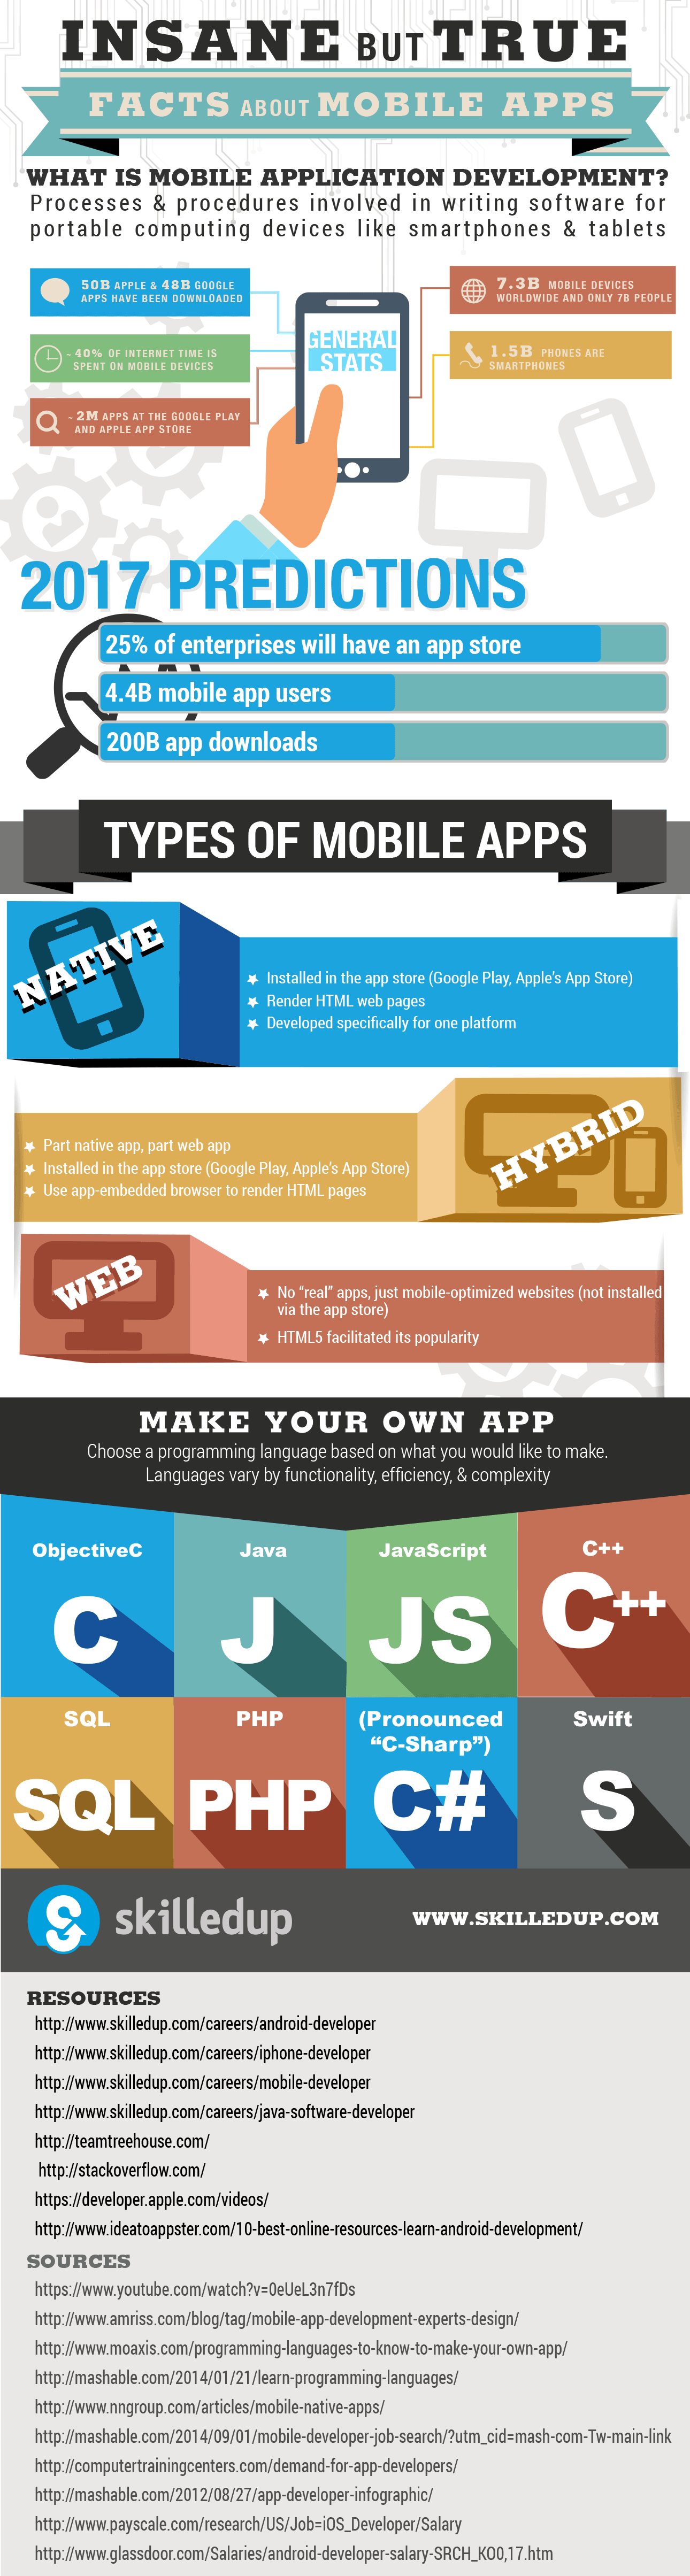 mobile apps